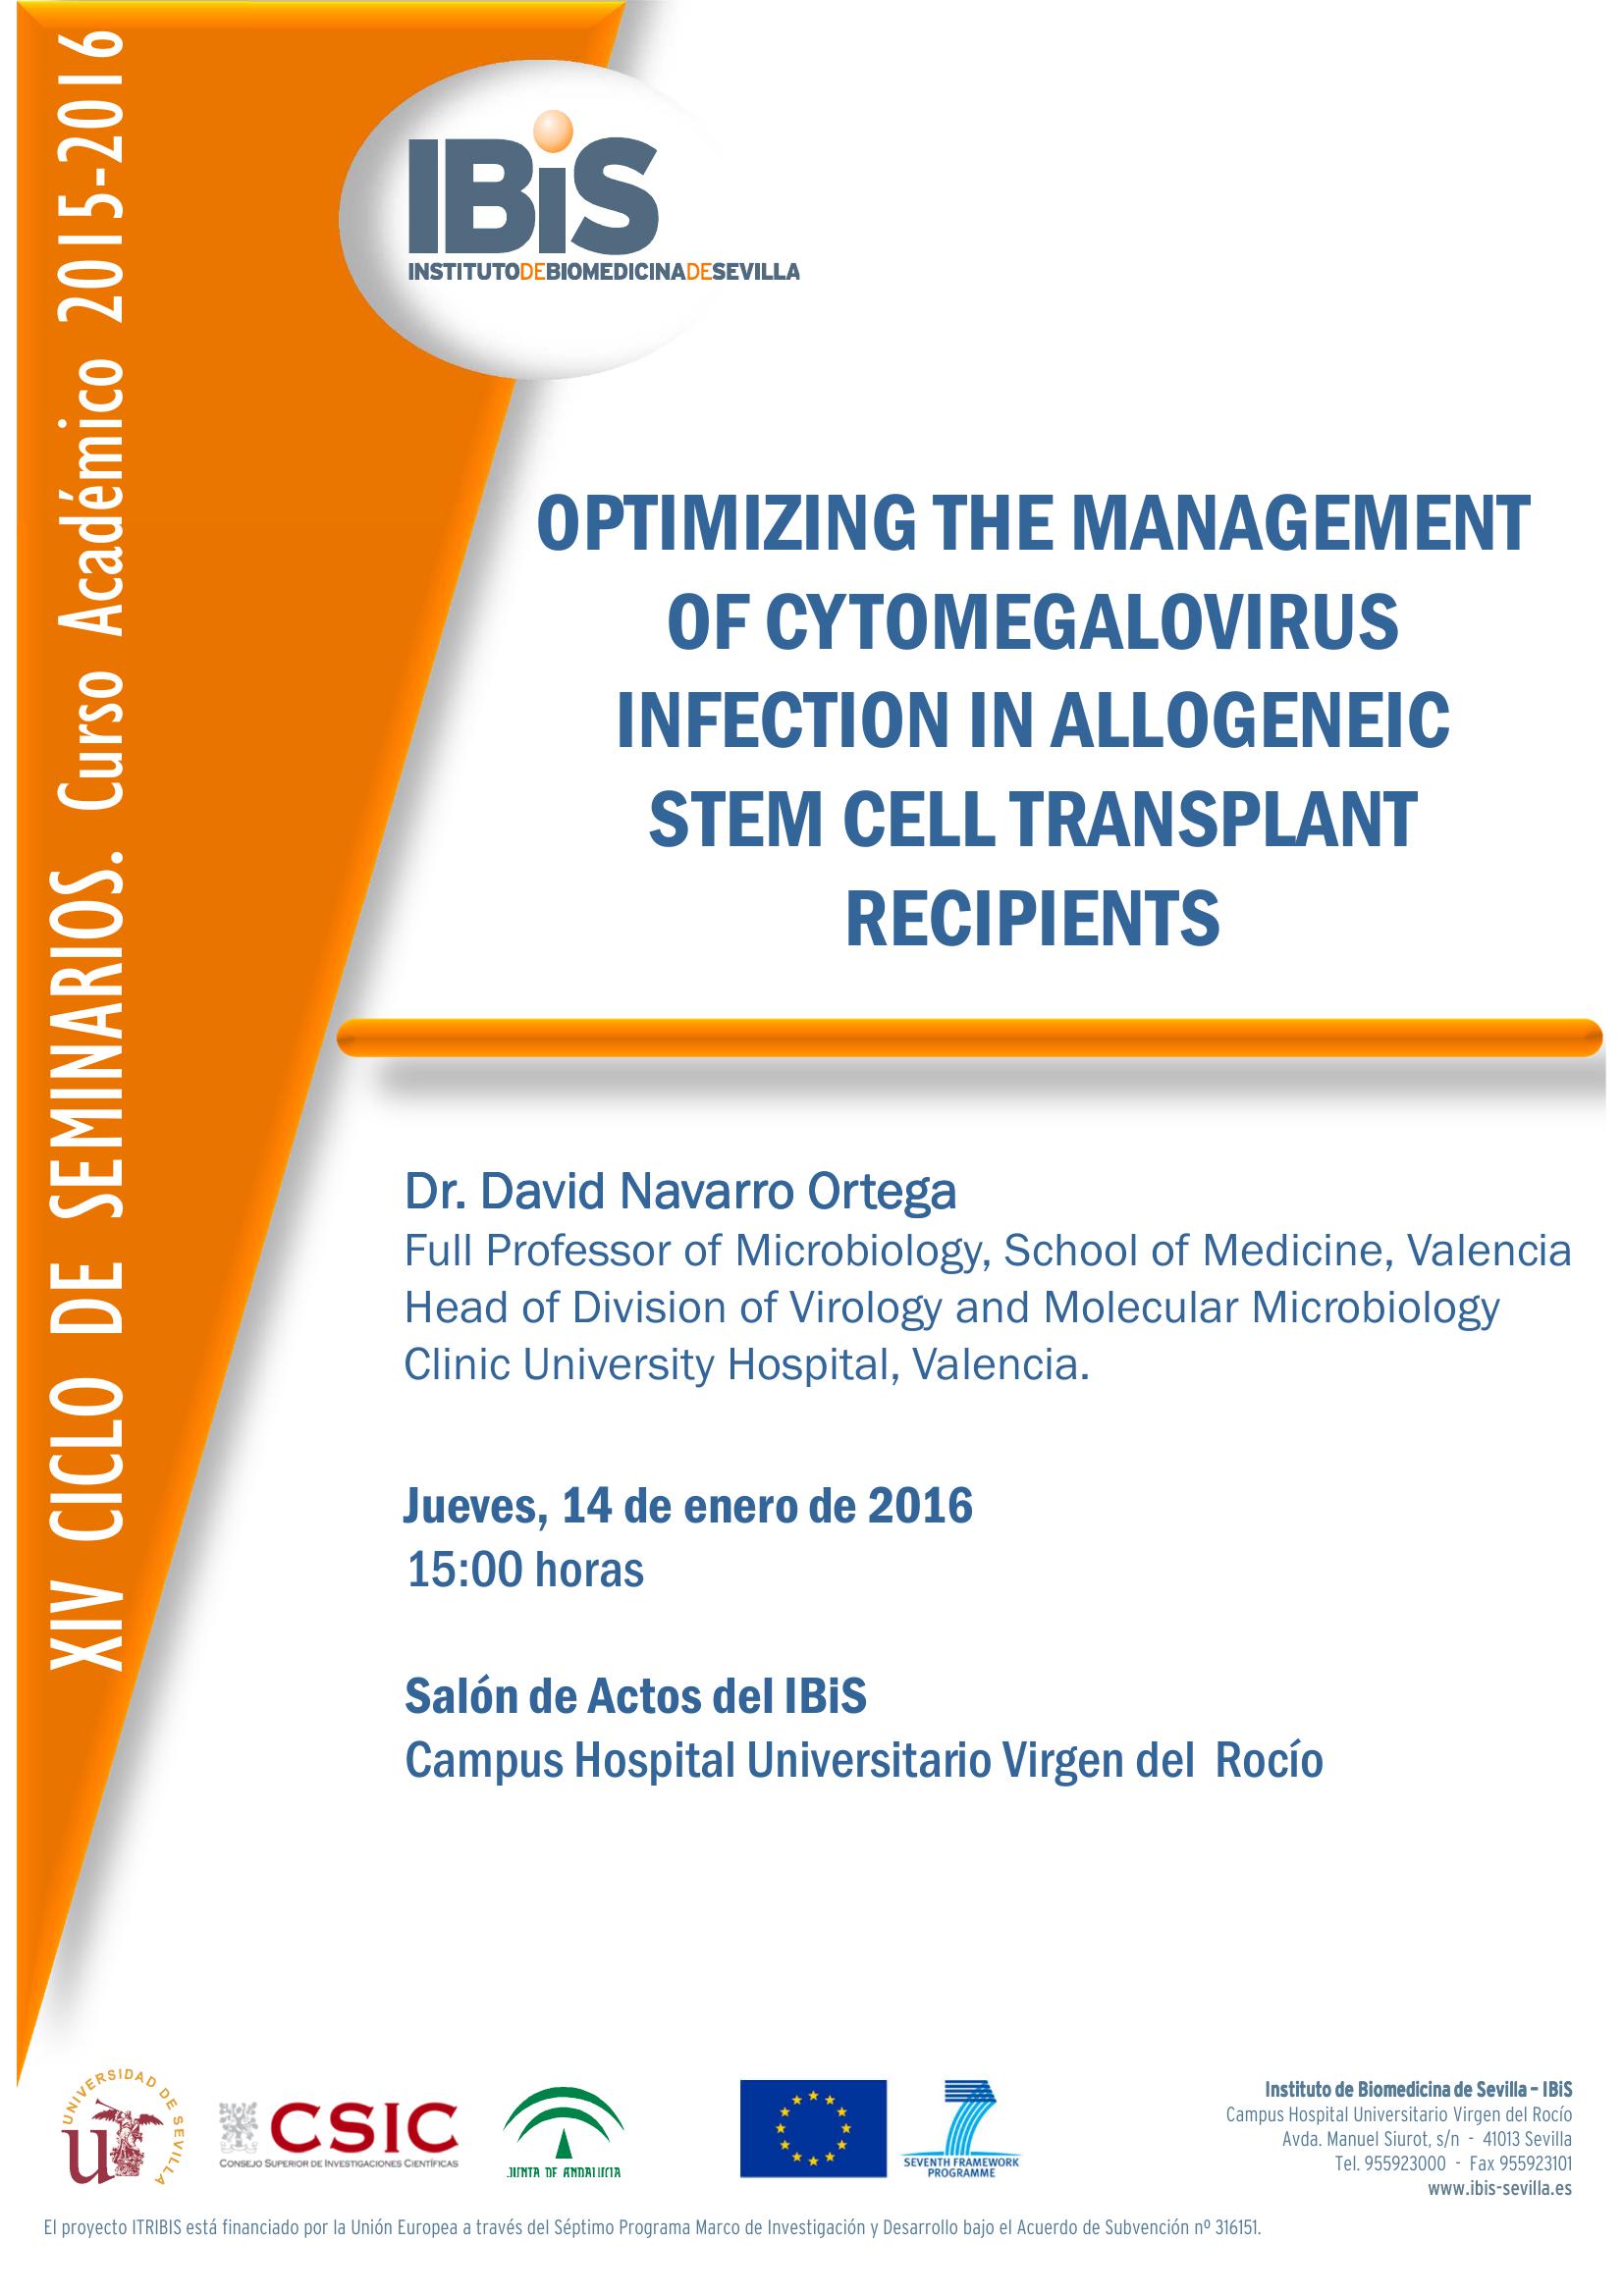 Poster: OPTIMIZING THE MANAGEMENT OF CYTOMEGALOVIRUS INFECTION IN ALLOGENEIC STEM CELL TRANSPLANT RECIPIENTS